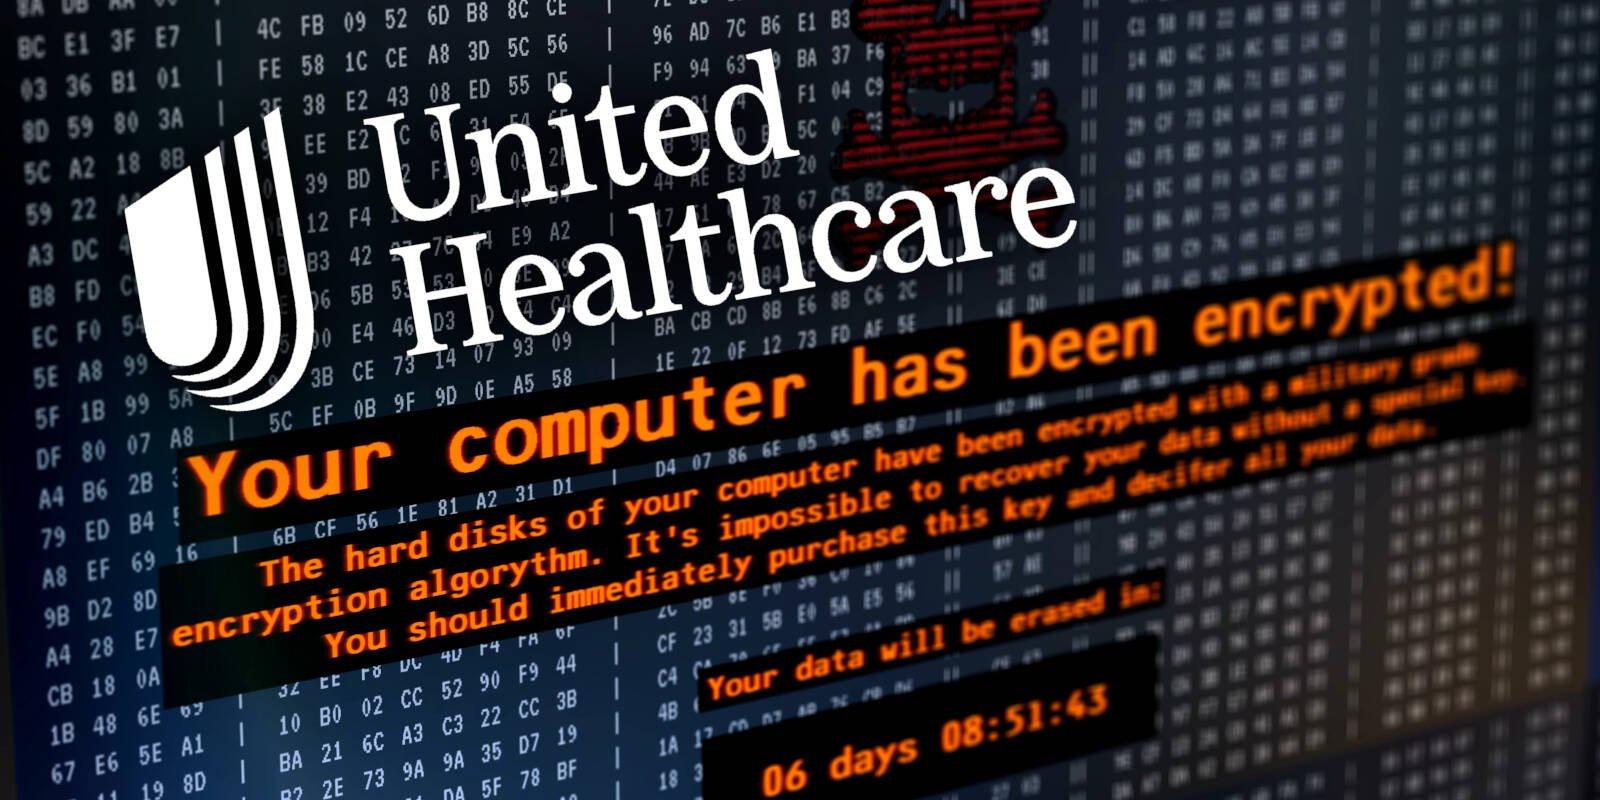 UnitedHealth CEO Andrew Witty will tell US lawmakers Wednesday the cyber-criminals who hit Change Healthcare with ransomware used stolen credentials t